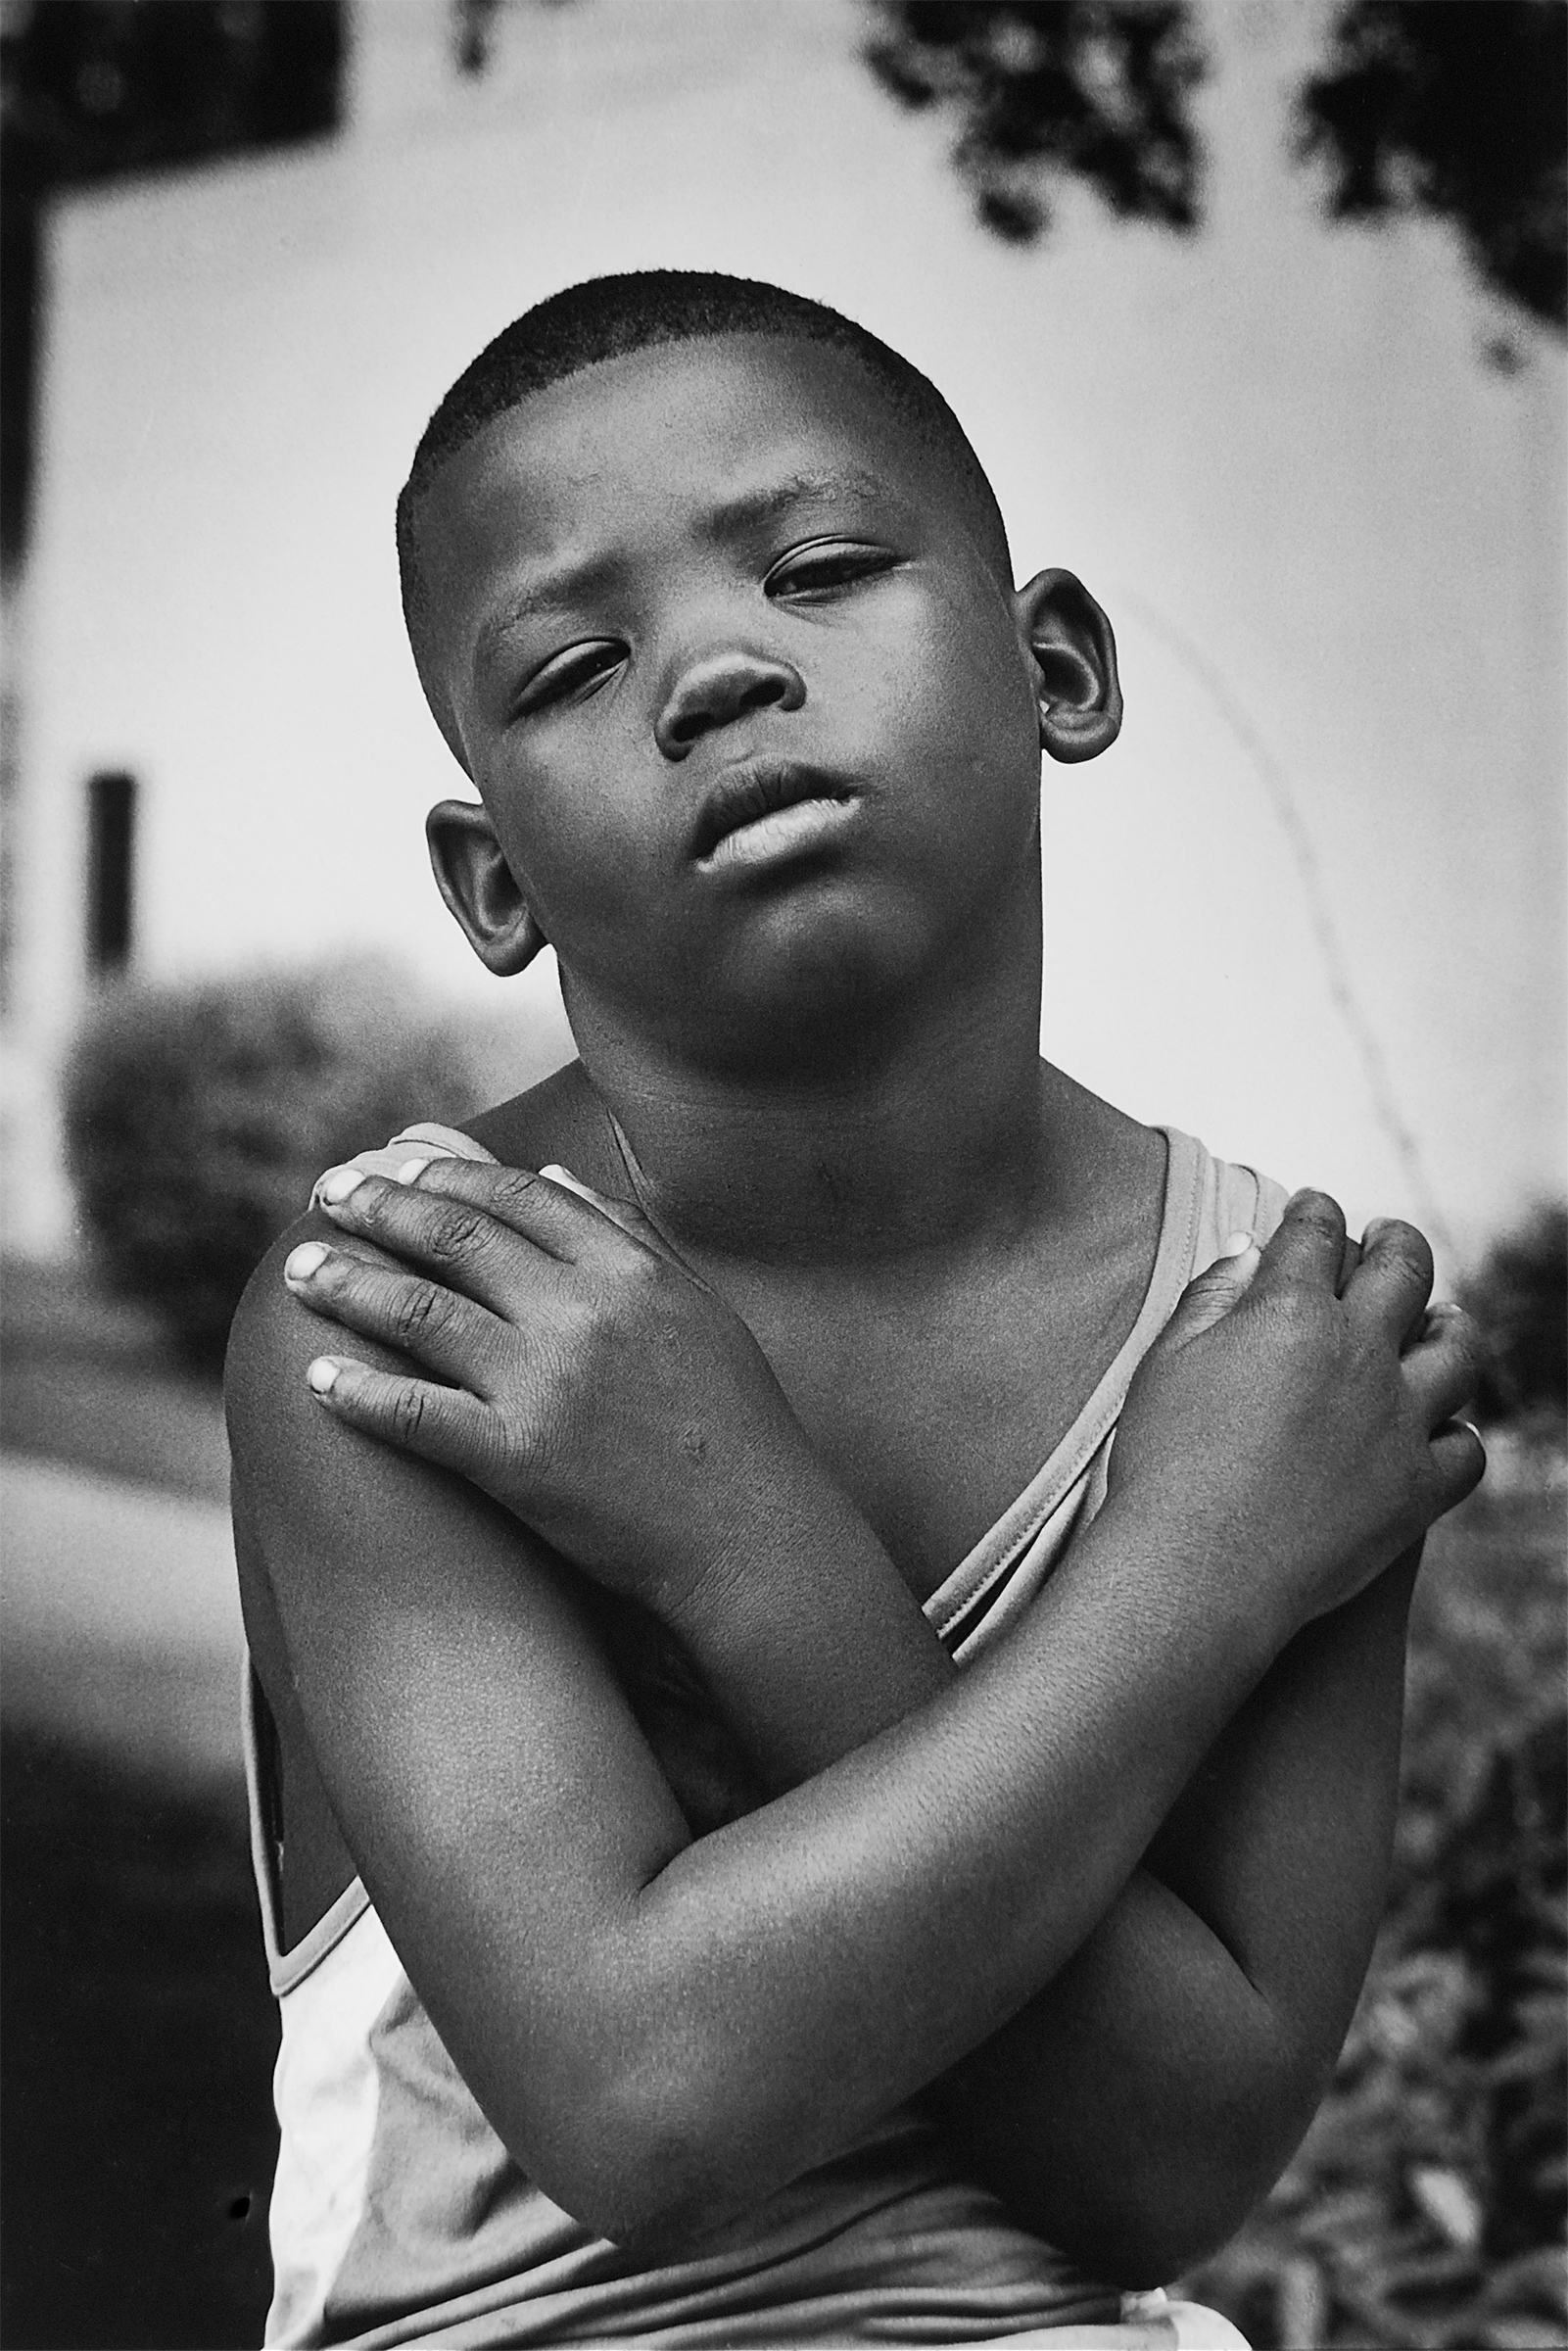 All Kings Were Boys (1989). “I want my photos to remind people of something or someone familiar and identify with it in some way,” says Hudnall. “There is no greater gift.” (Earlie Hudnall Jr.)